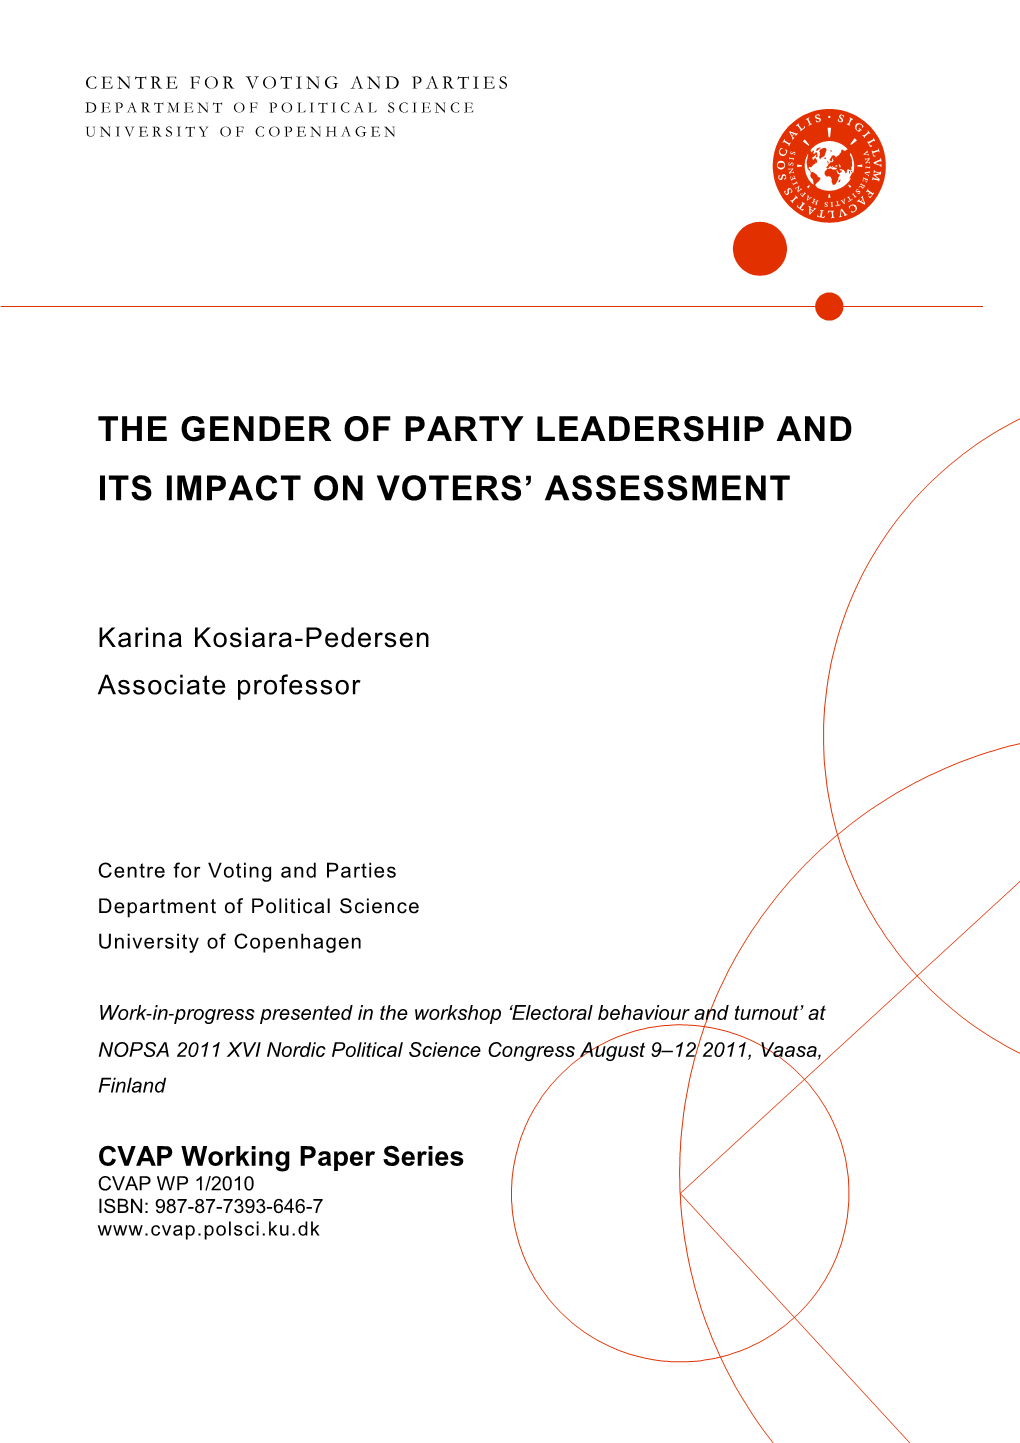 The Gender of Party Leadership and Its Impact on Voters' Assessment